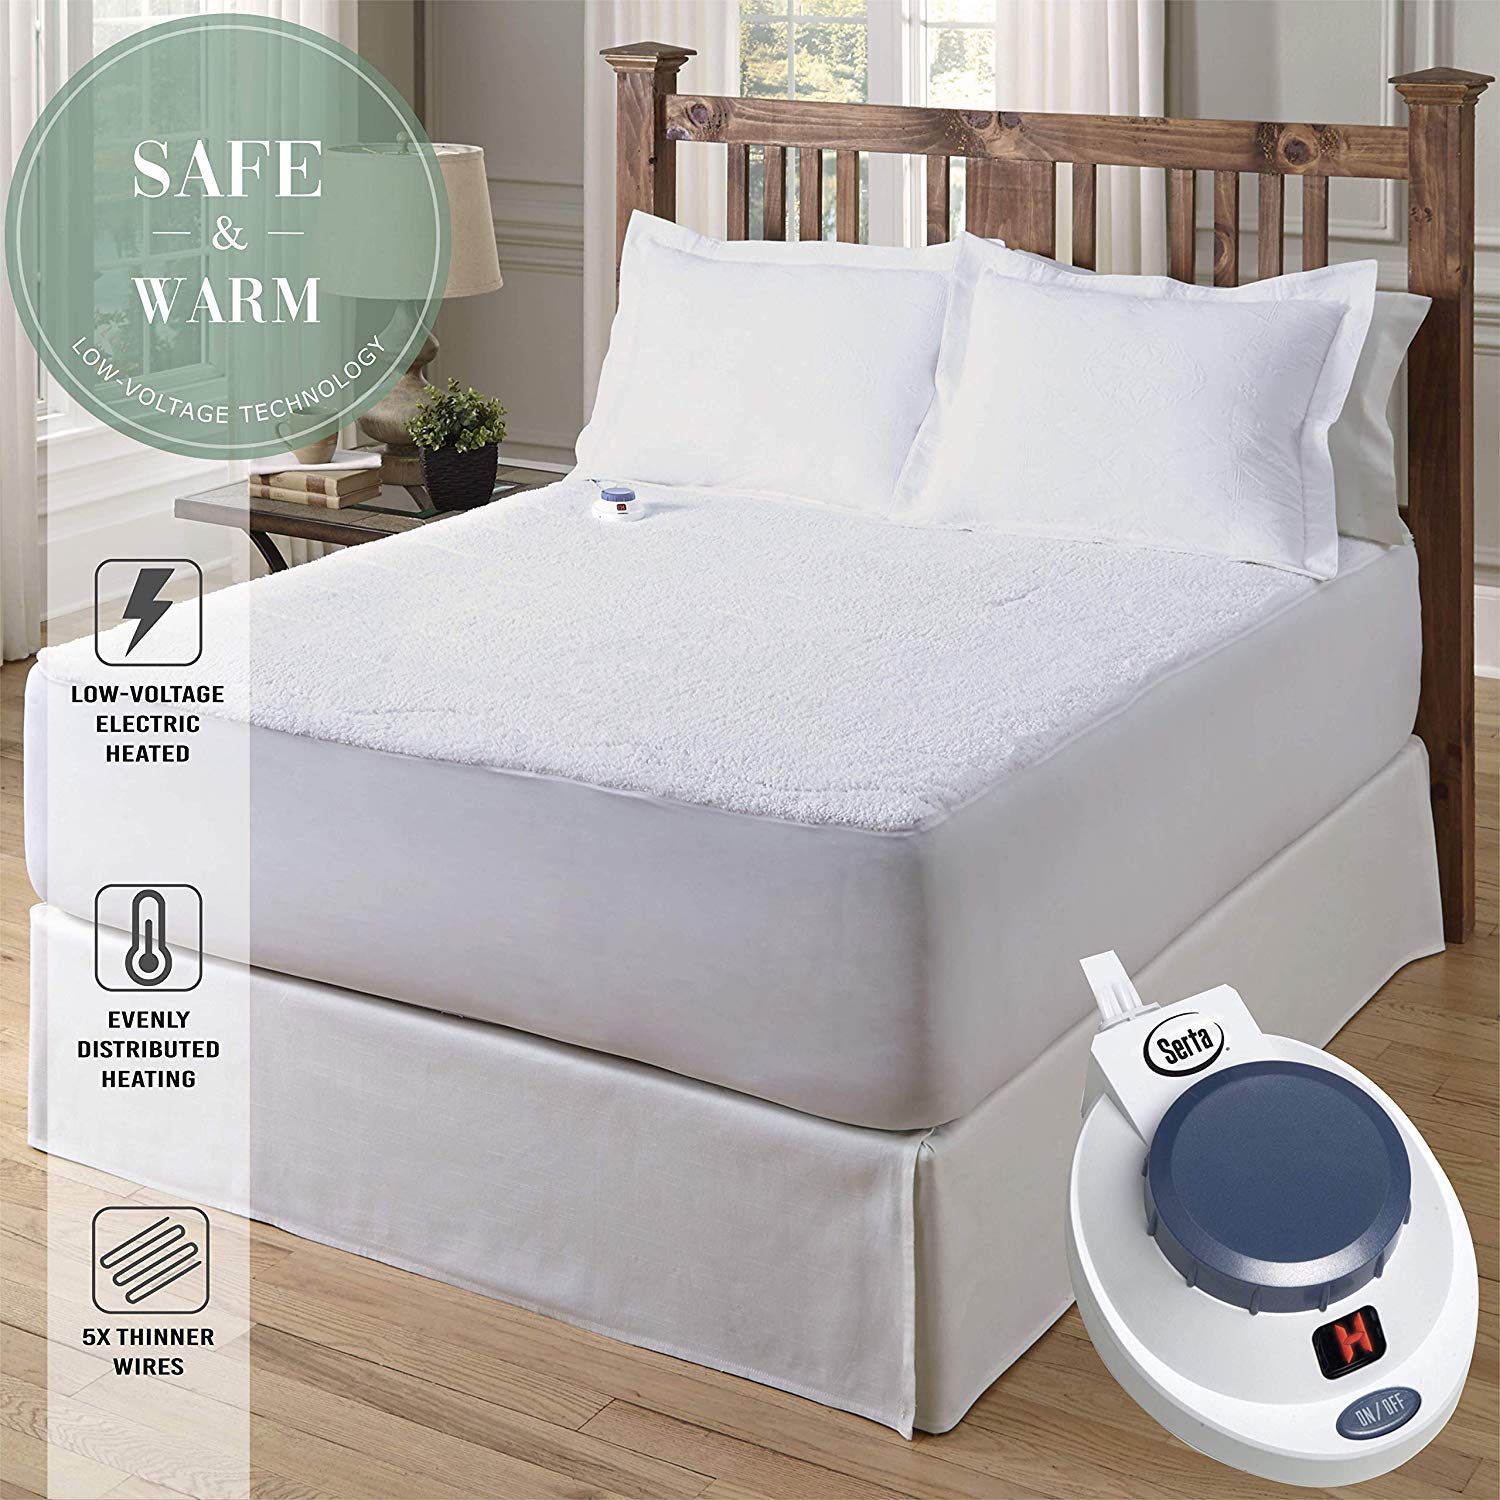 The Best Heated Mattress Pads - Reviews & Buying Guide ...